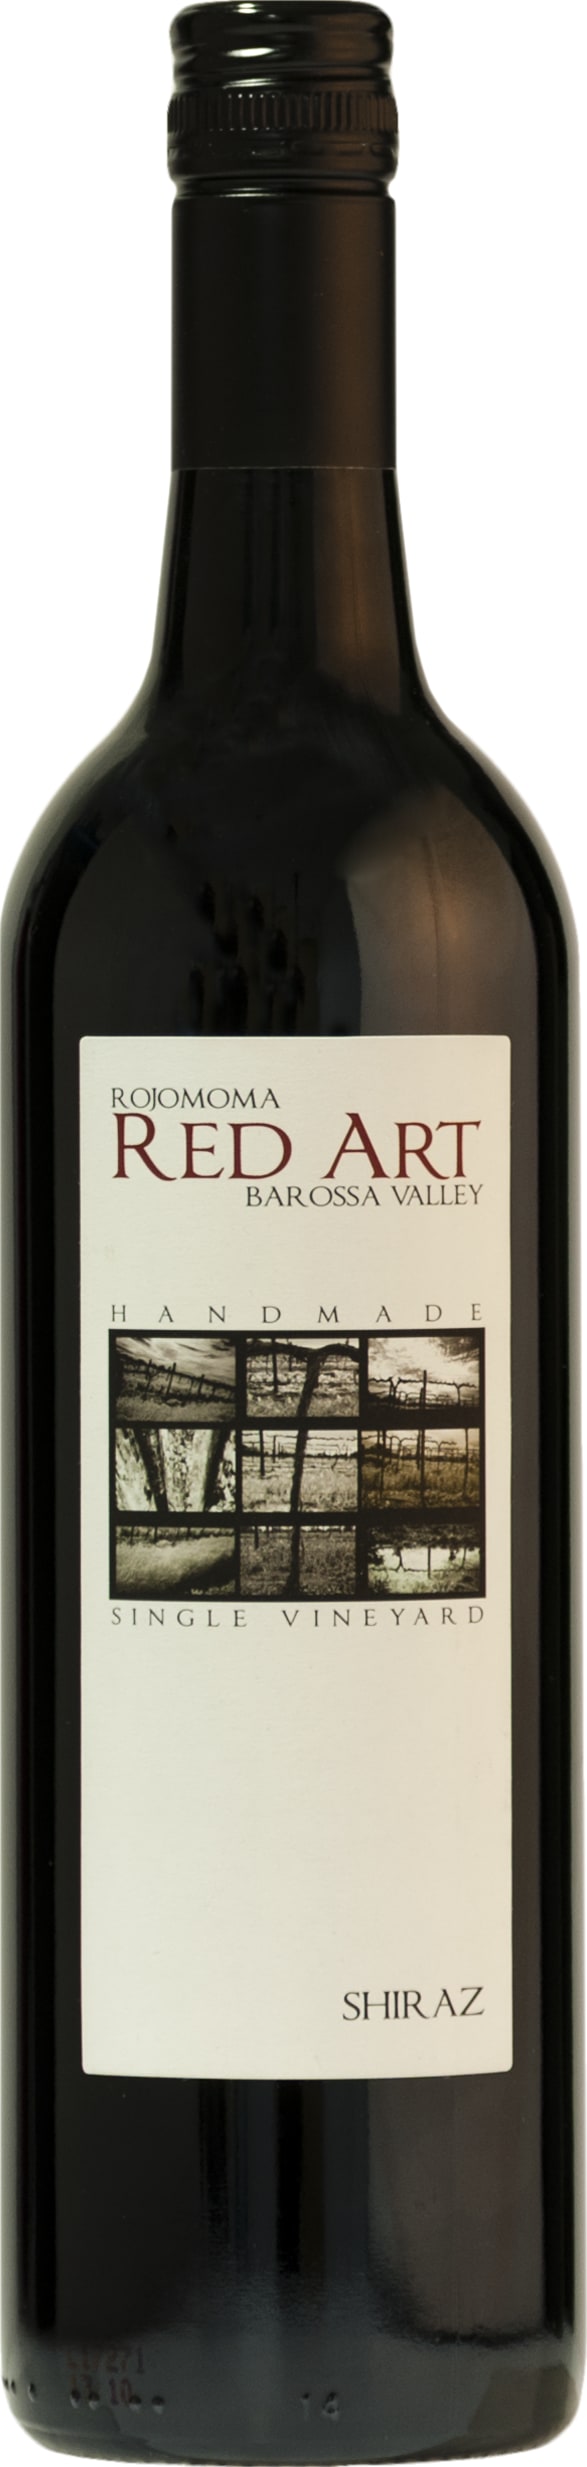 Rojomoma Red Art Shiraz (Cellar Release) 2004 75cl - Buy Rojomoma Wines from GREAT WINES DIRECT wine shop